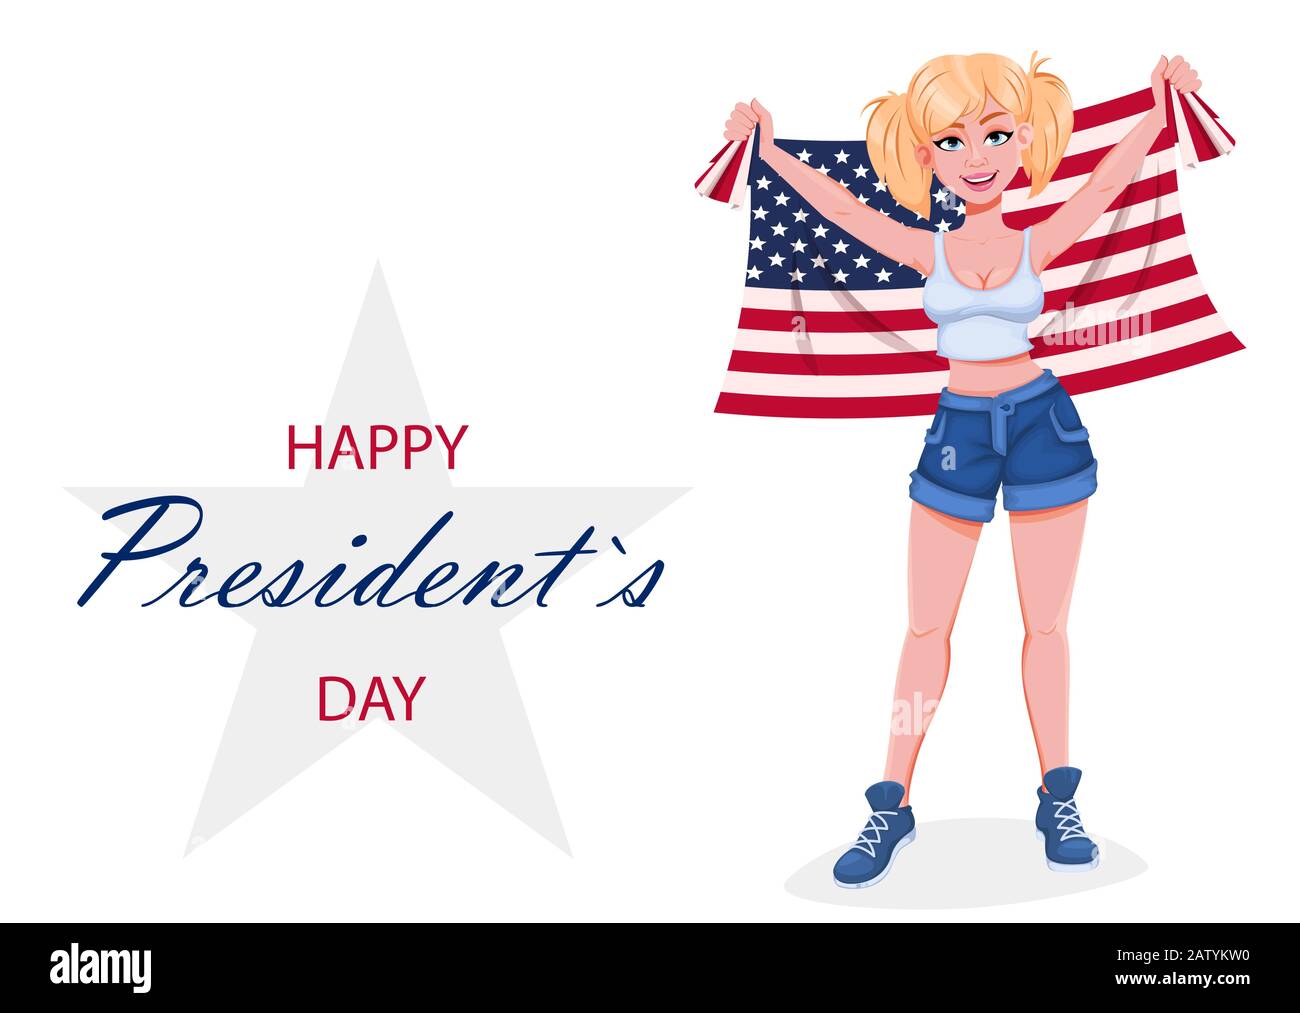 Happy President's day greeting card. Beautiful girl cartoon character holding USA flag. Stock vector illustration. Stock Vector